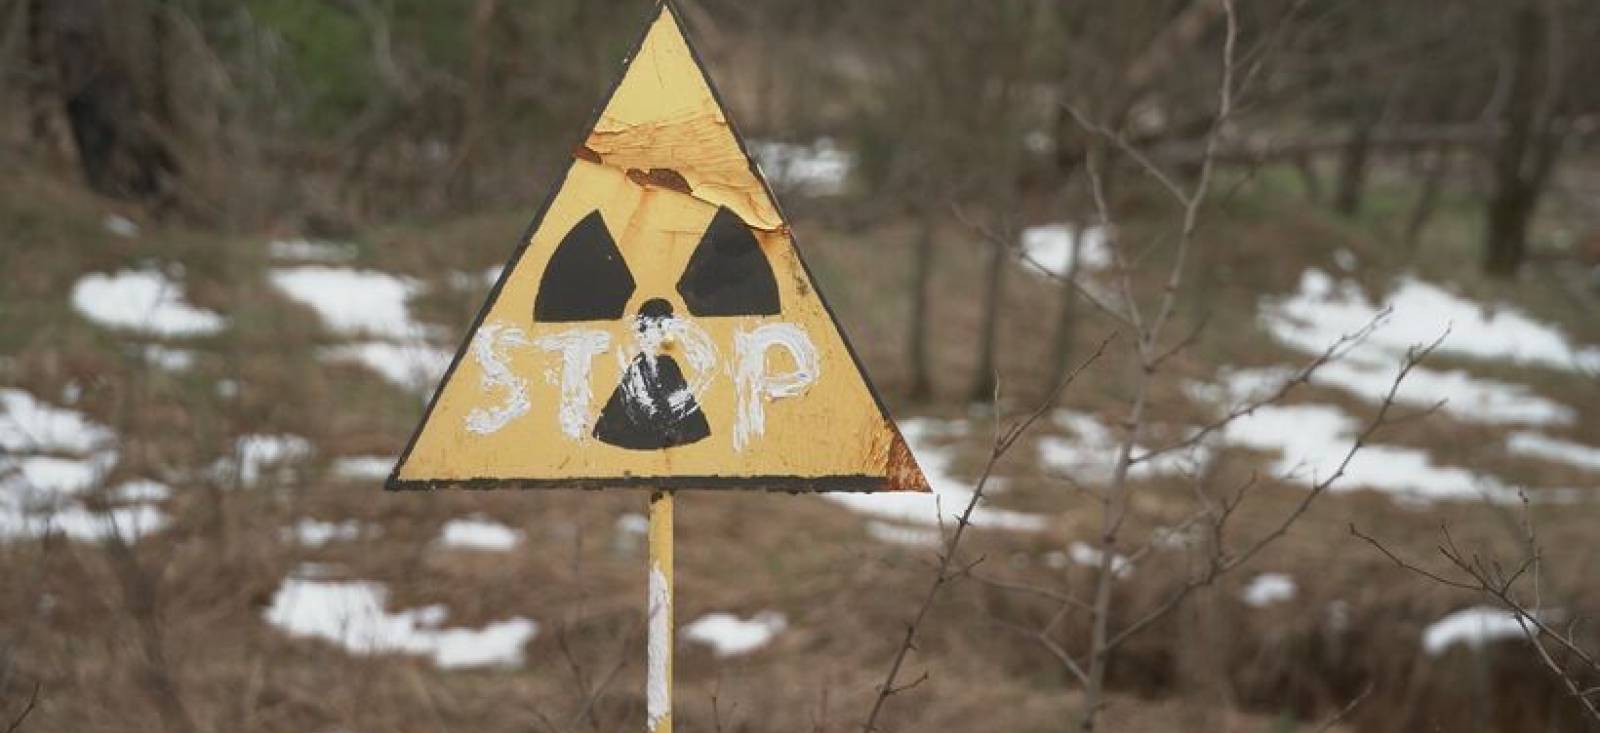 NUCLEAR POWER PLANTS IN WAR ZONE – A NEW THREAT?